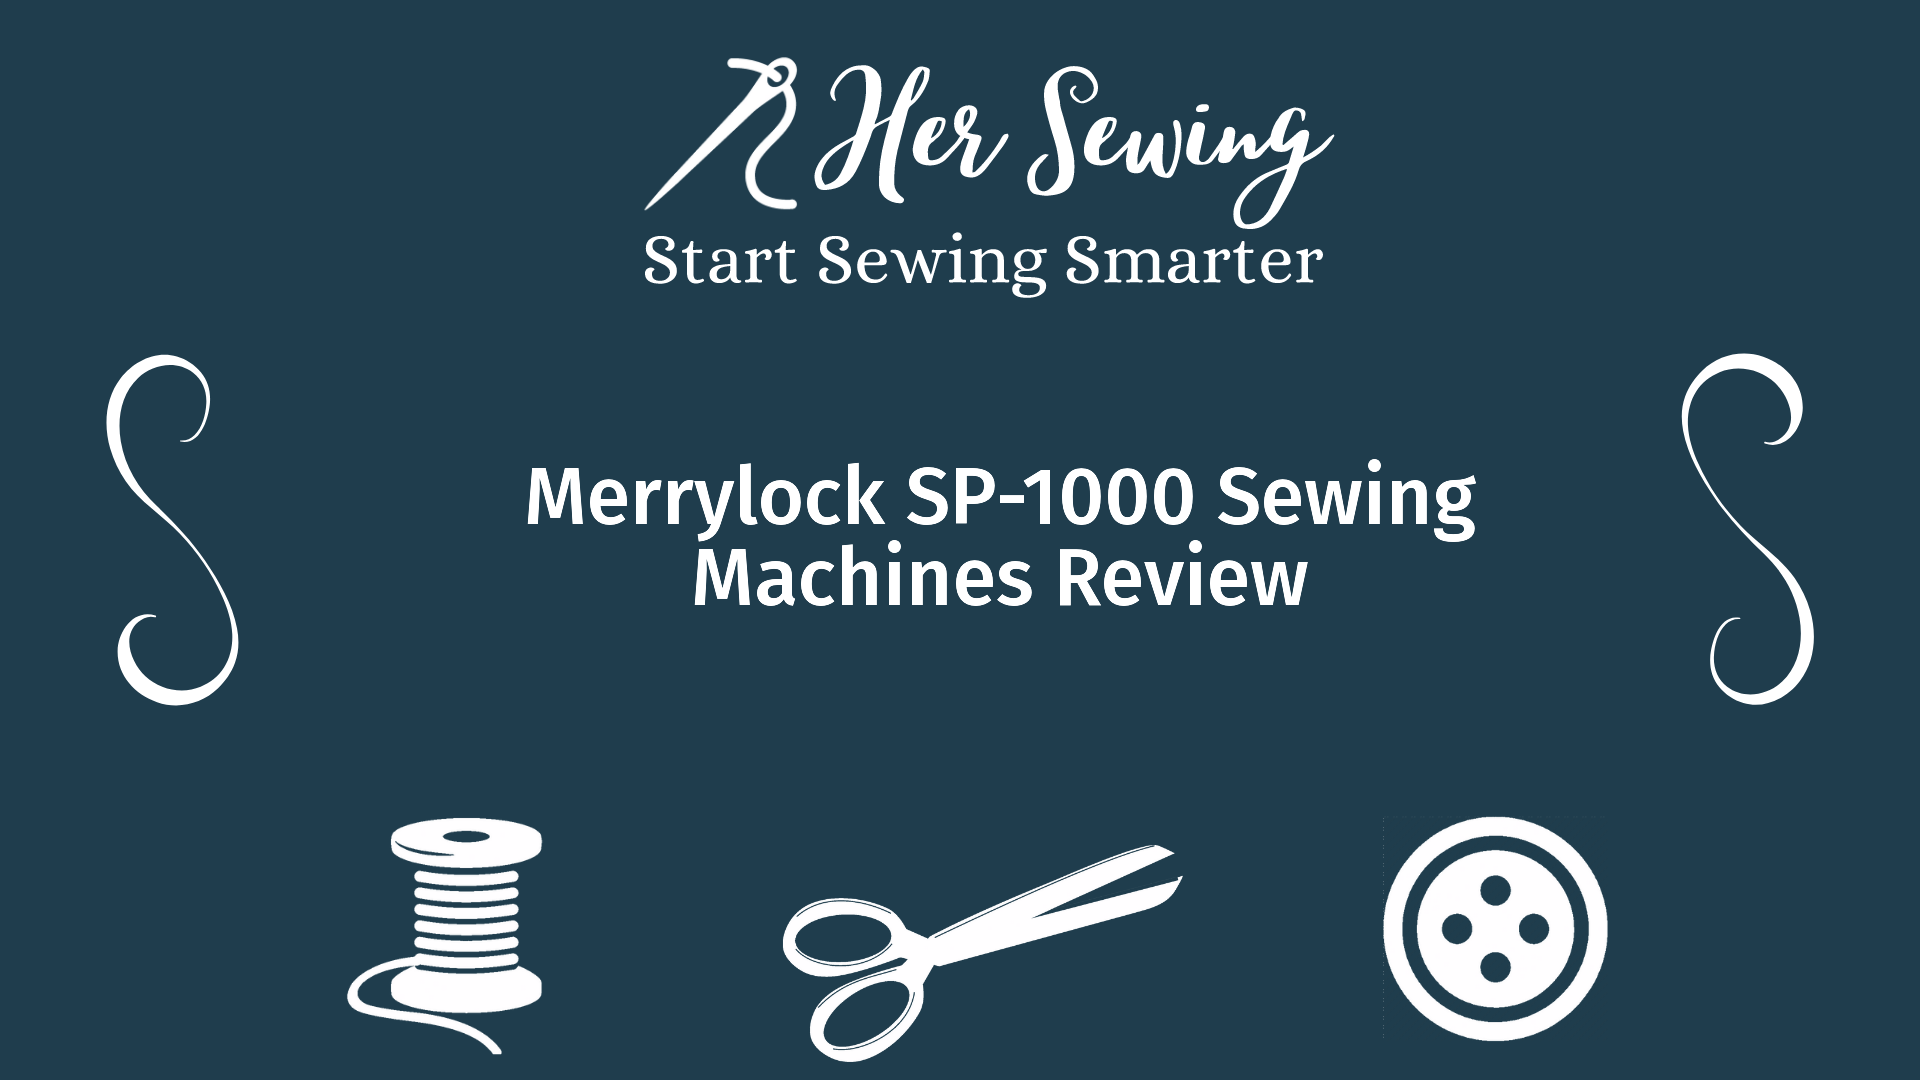 Merrylock SP-1000 Sewing Machines Review